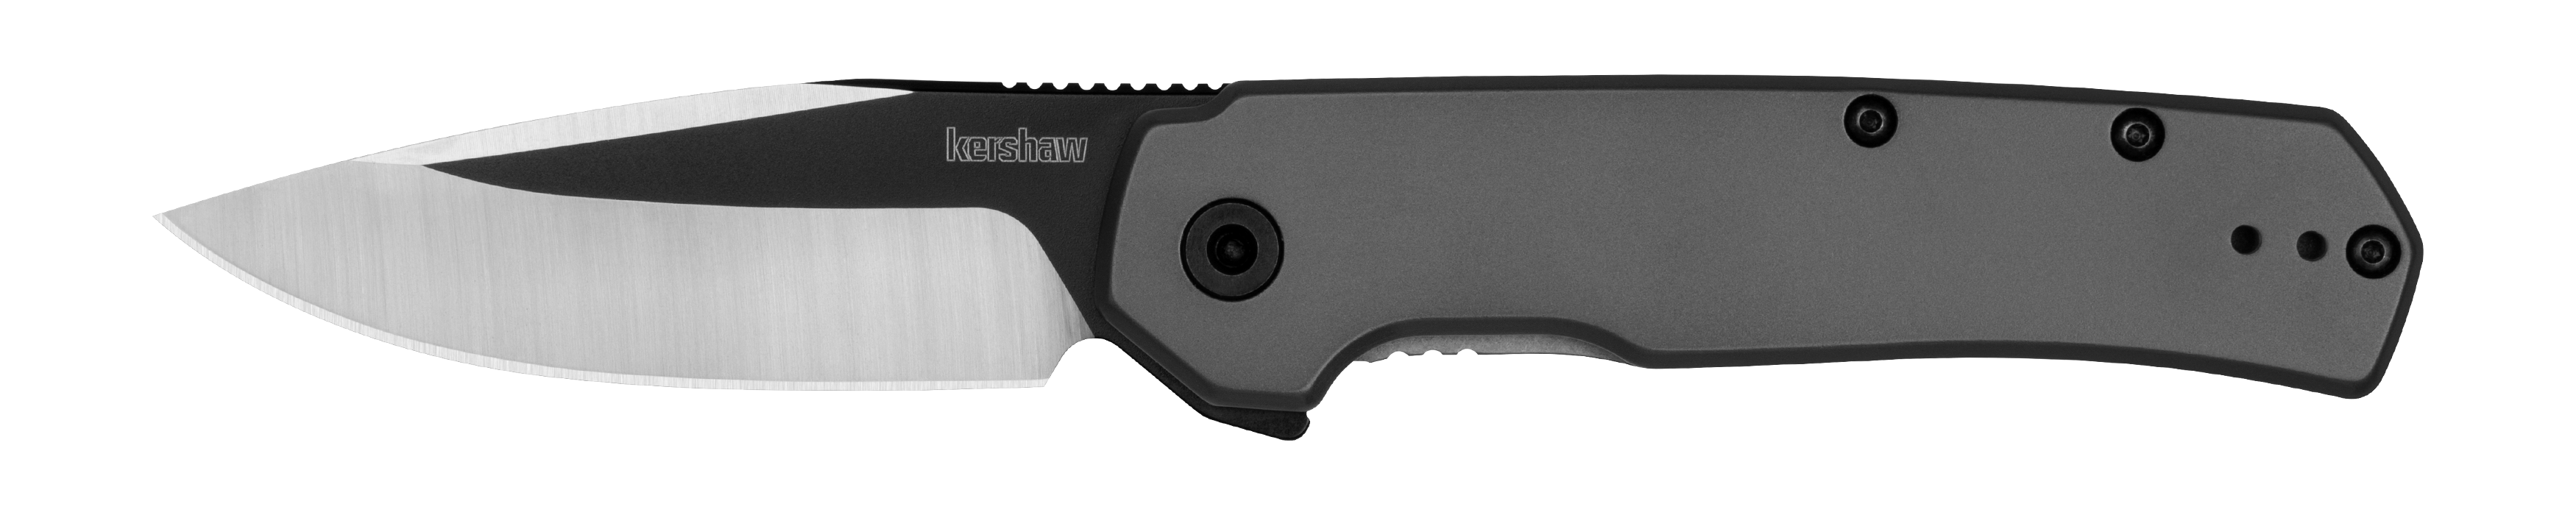 Kershaw Thermal - Frame Lock - Assisted Opening - 8Cr13MoV Steel - 1411